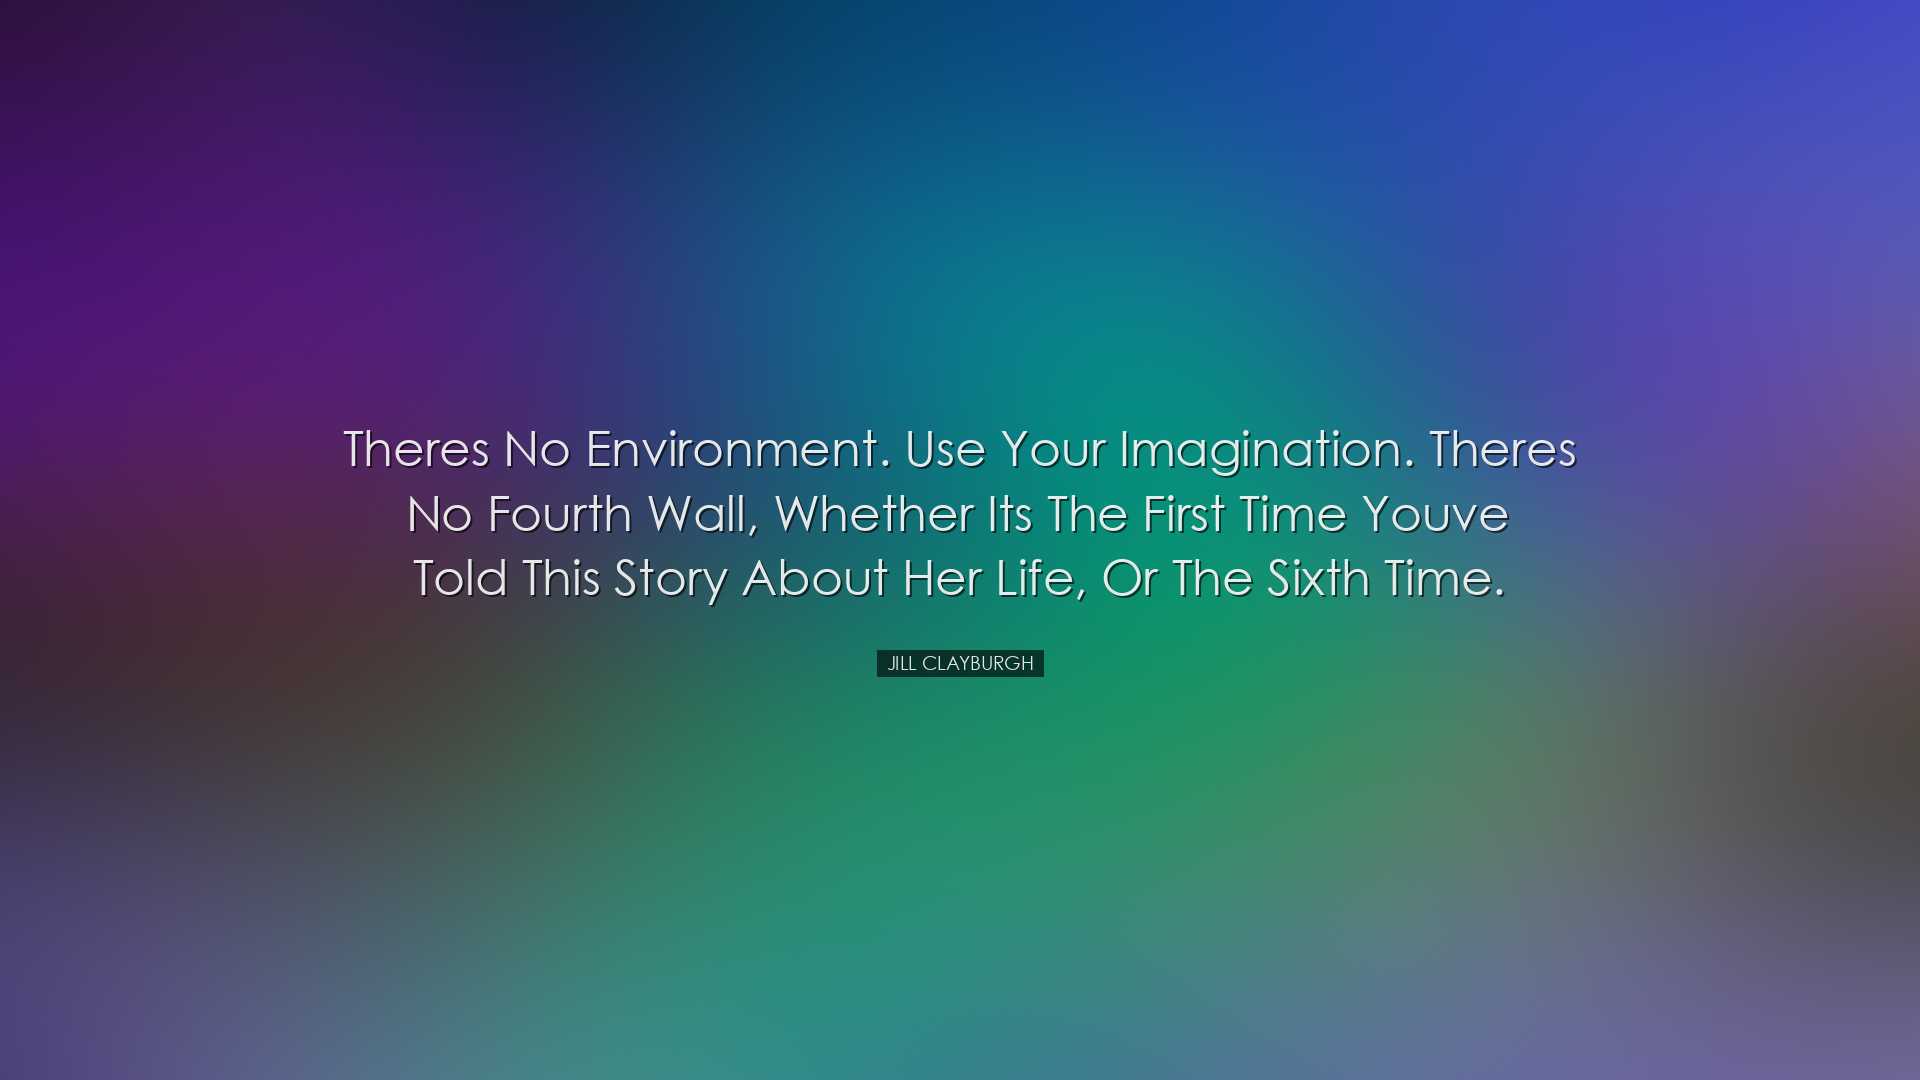 Theres no environment. Use your imagination. Theres no fourth wall